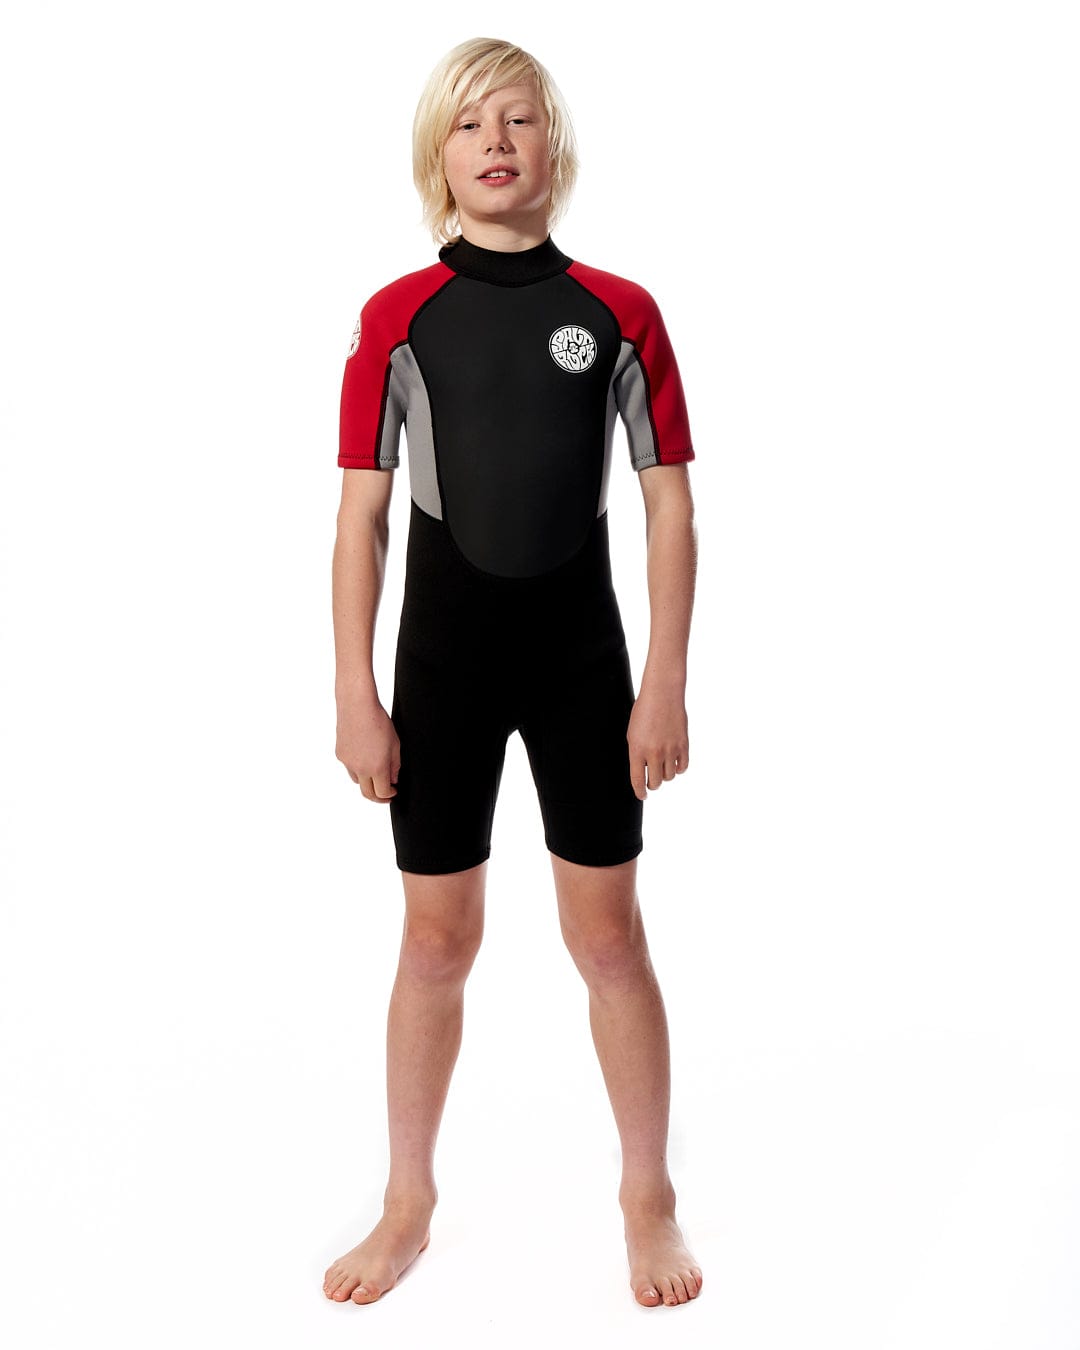 A young boy in a Saltrock Core - Boys 3/2 Shortie Wetsuit in red, standing in front of a white background, ready for some beach days.